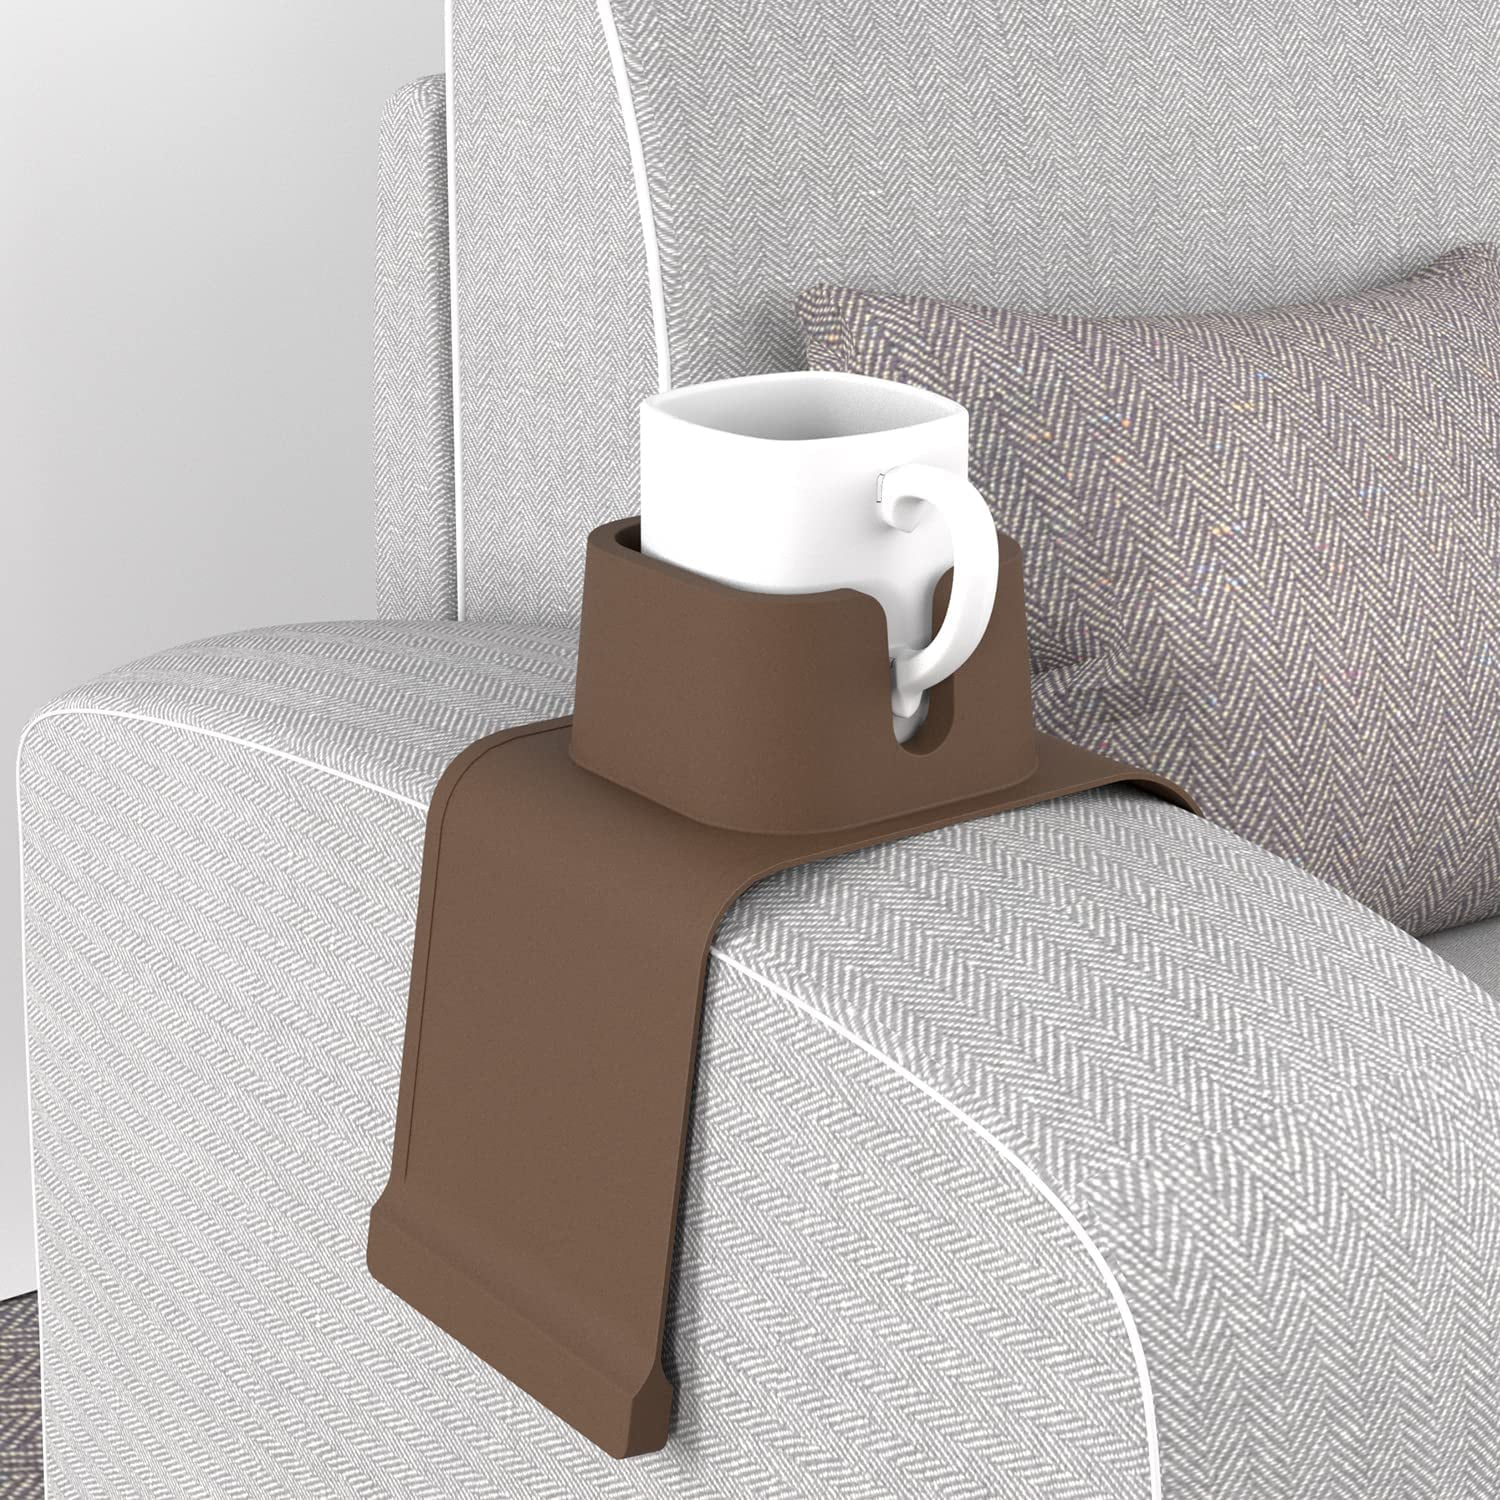 Petmoko Couch Cup Holder, Anti-Spill Sofa Cup Holder Silicone Coaster,Suitable  for Sofa Recliner Armchairs,Brown 